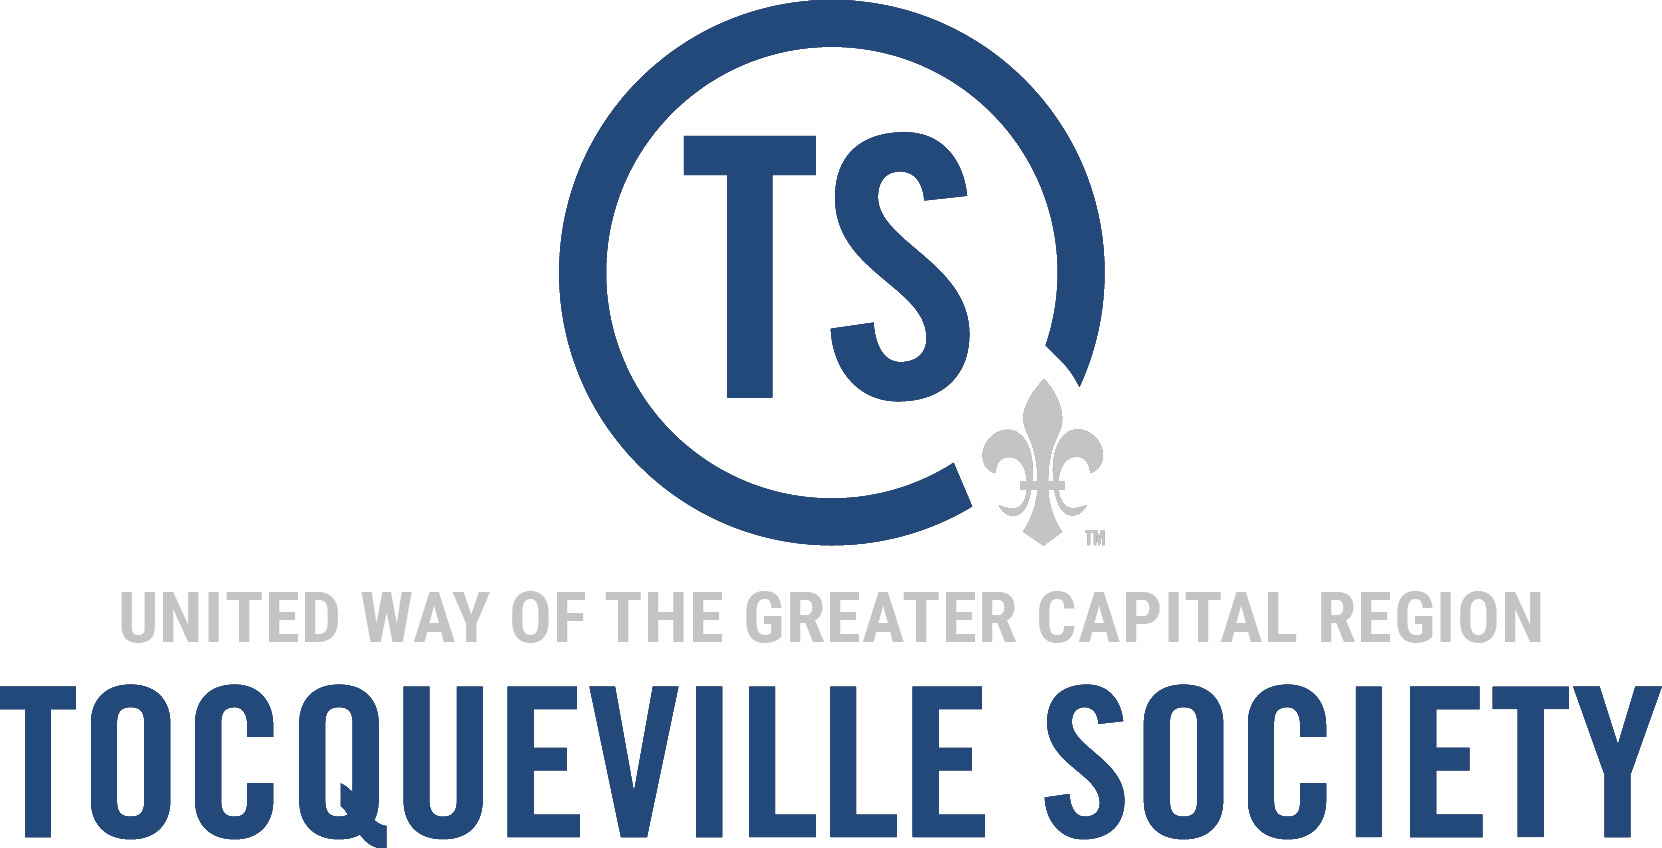 Tocqueville Society